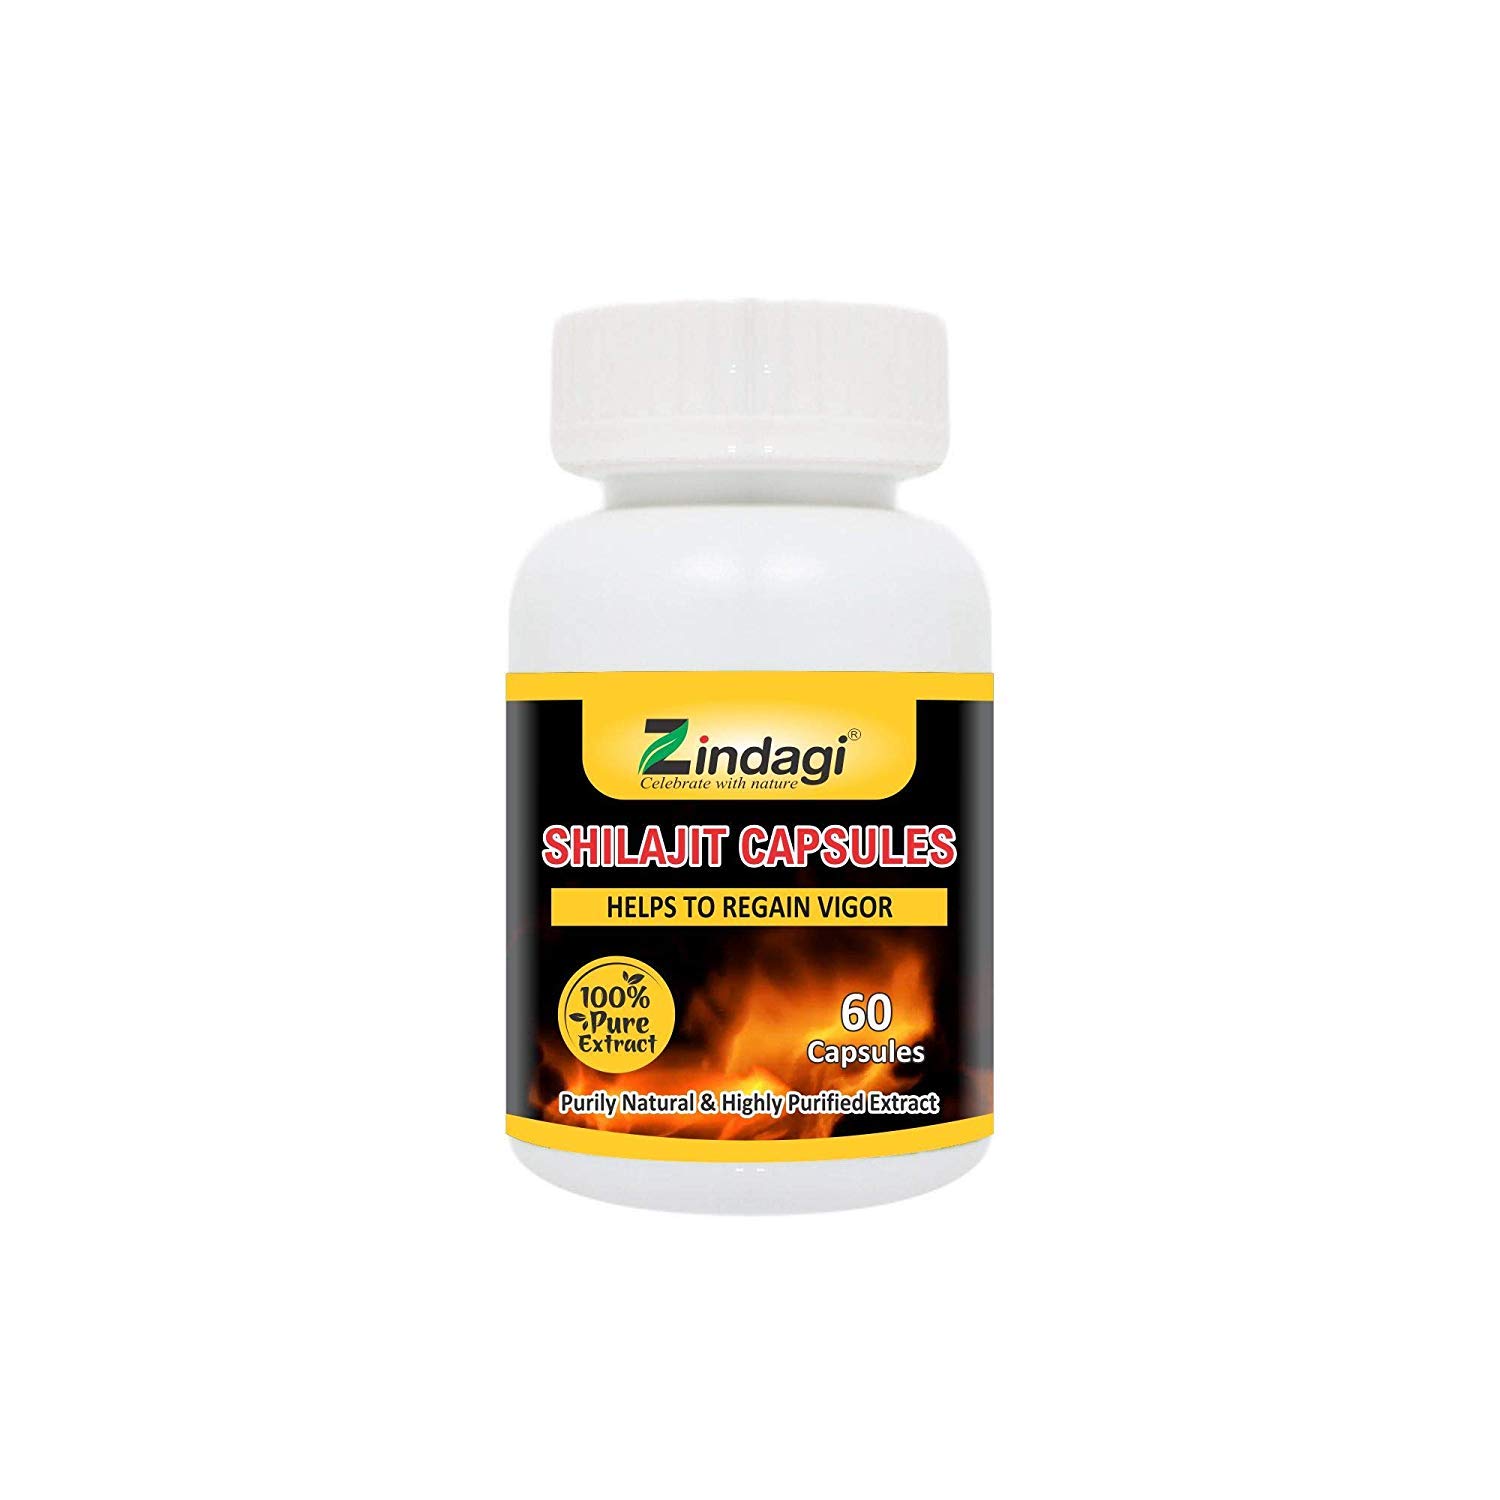 Buy Zindagi Shilajit Extract Capsules Strength And Stamina For Men 100 Natural And Pure 7831